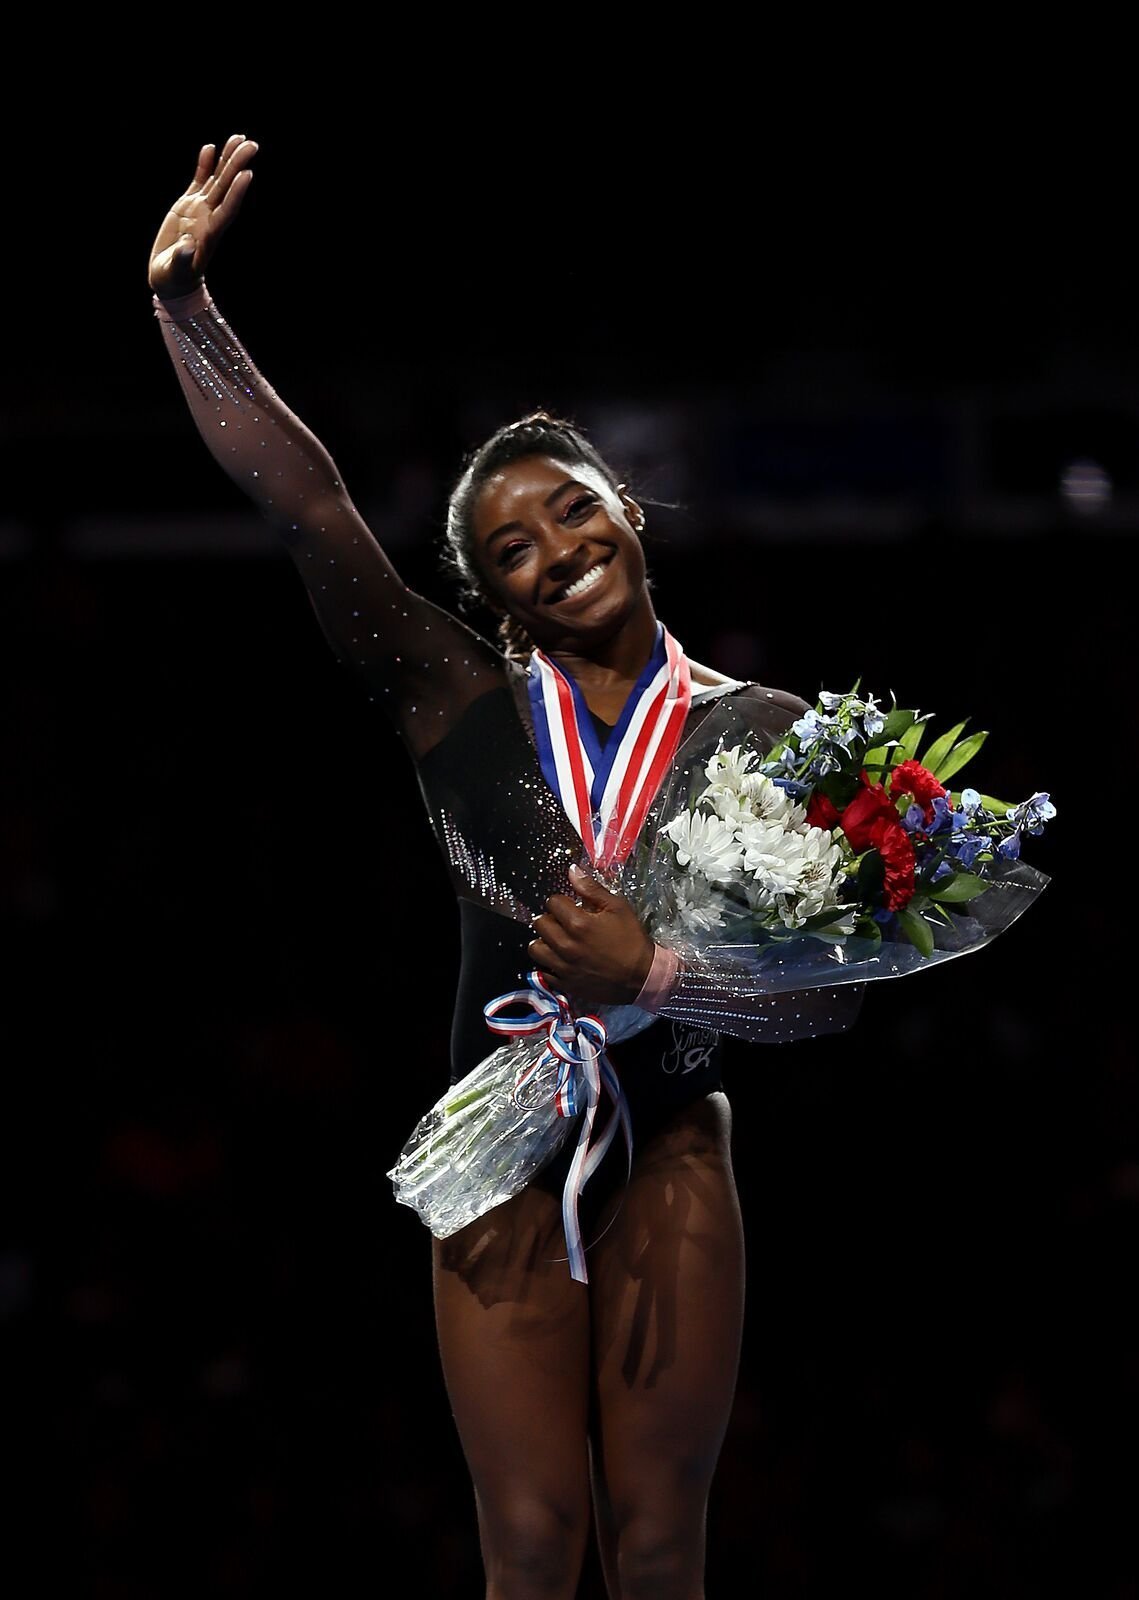 Simone Biles after winning the all-around gold medal during Women's Senior competition of the 2019 U.S. Gymnastics Championships. | Source: Getty Images